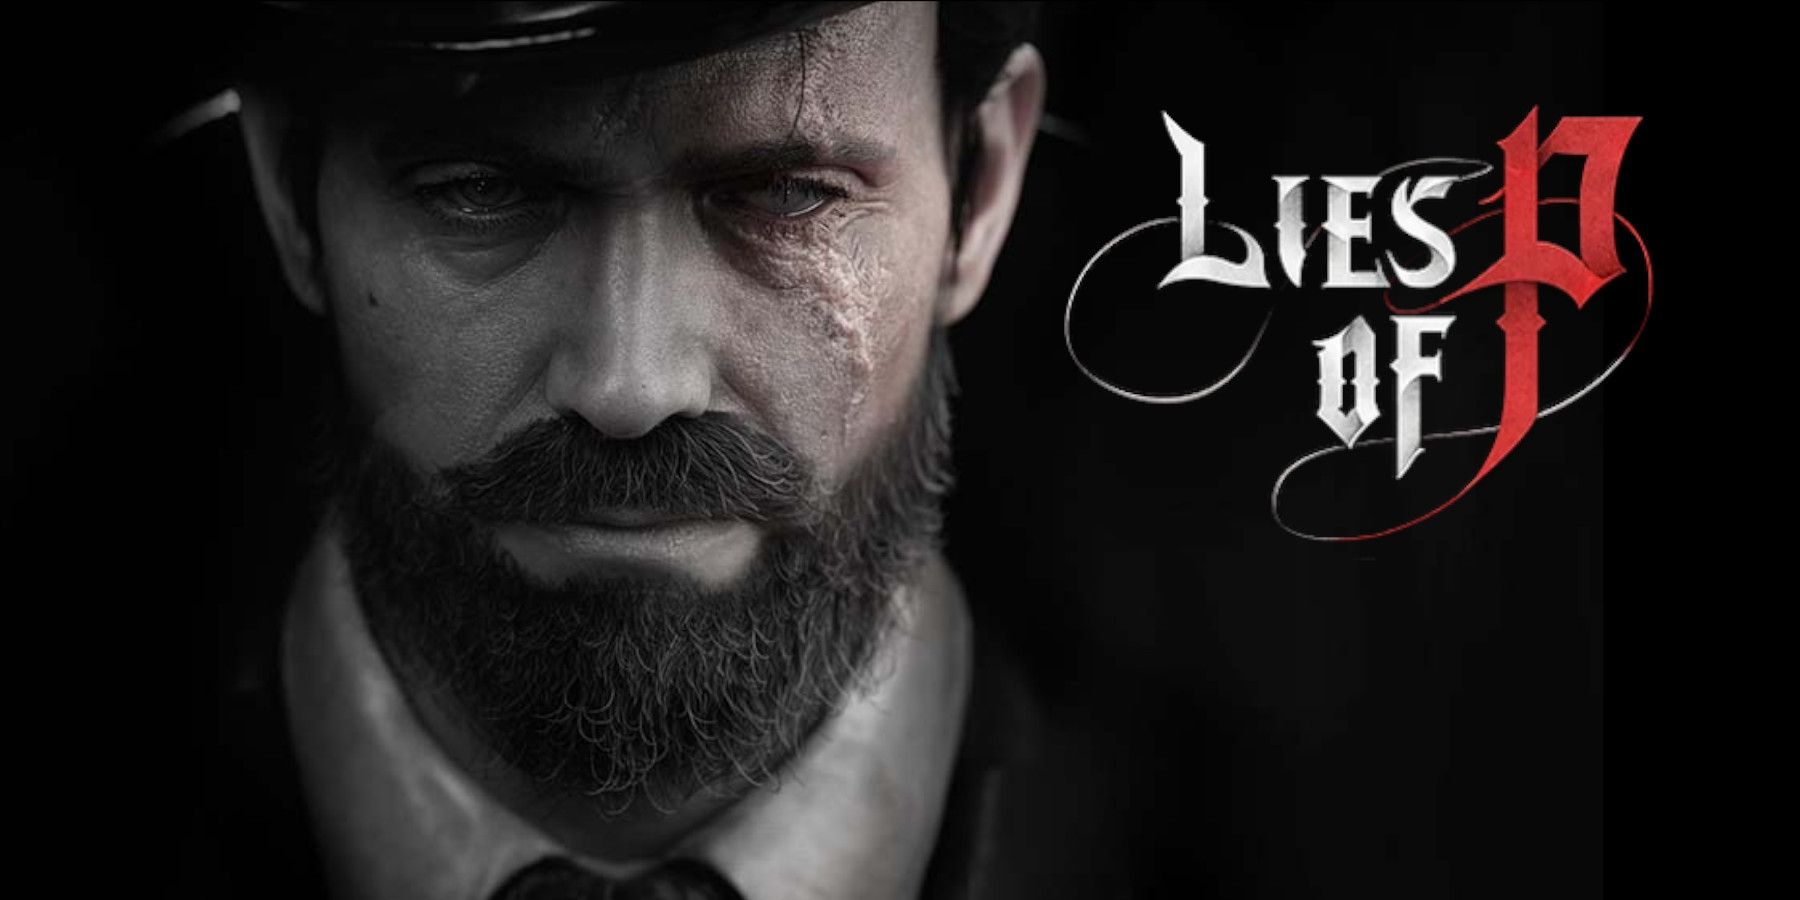 Lies of P launch guide: Release date, trailer, preorder, file size, and more